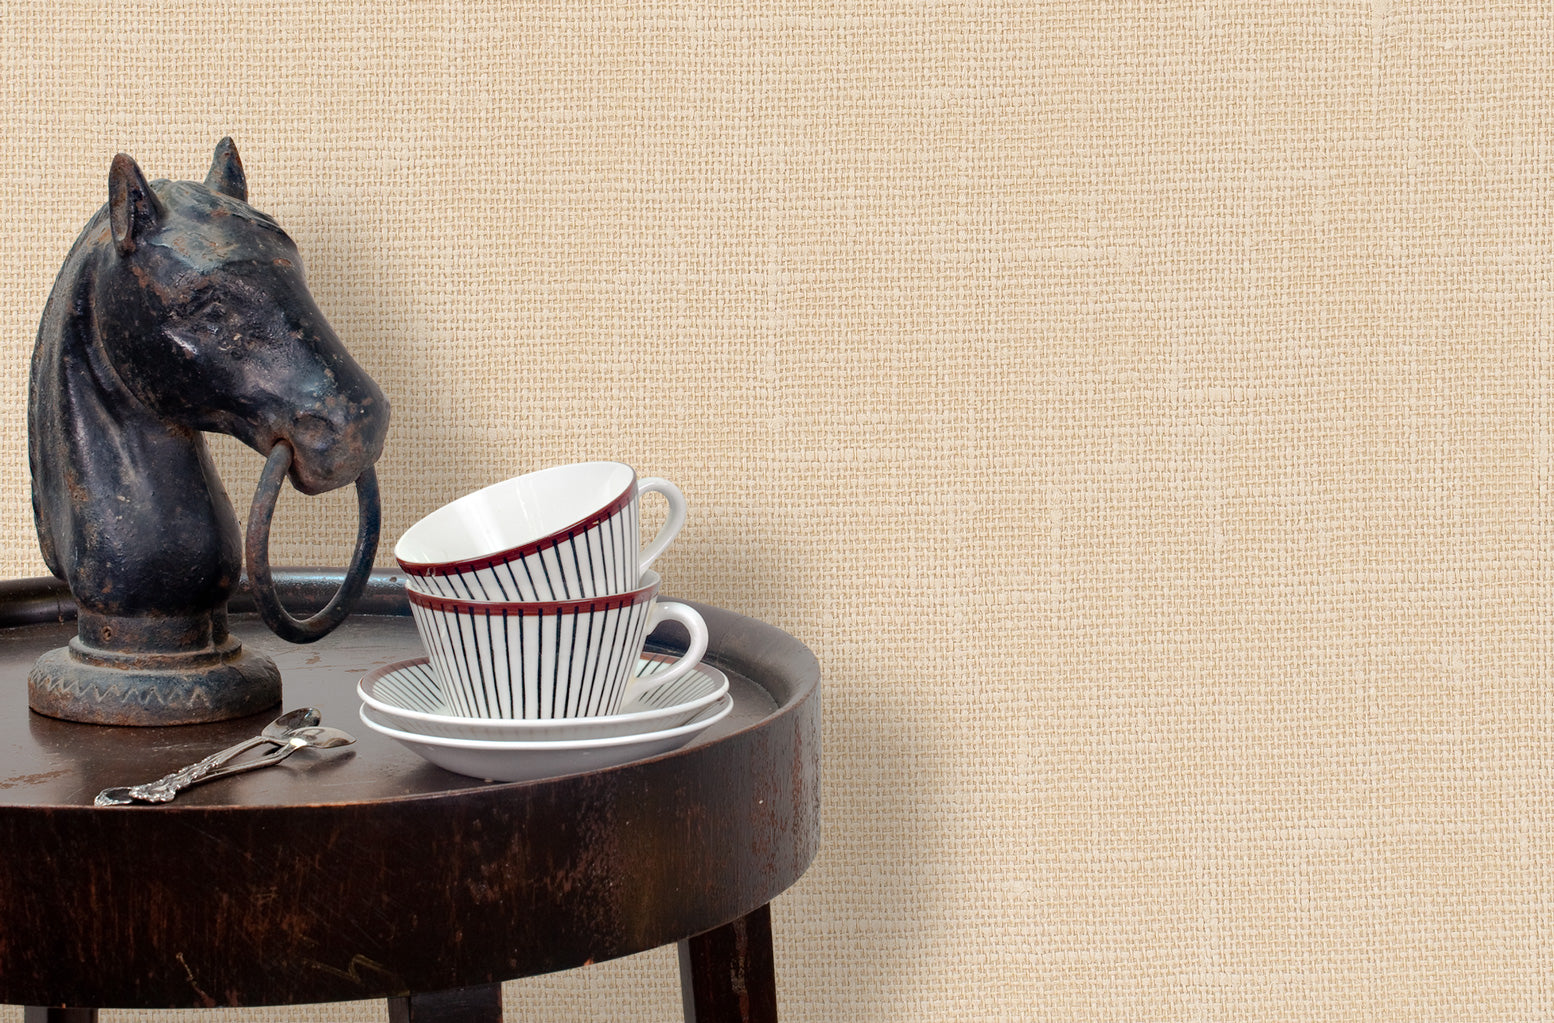 End table with a horse sculpture and tea cups in front of a wall papered in textured cream hemp wallpaper.